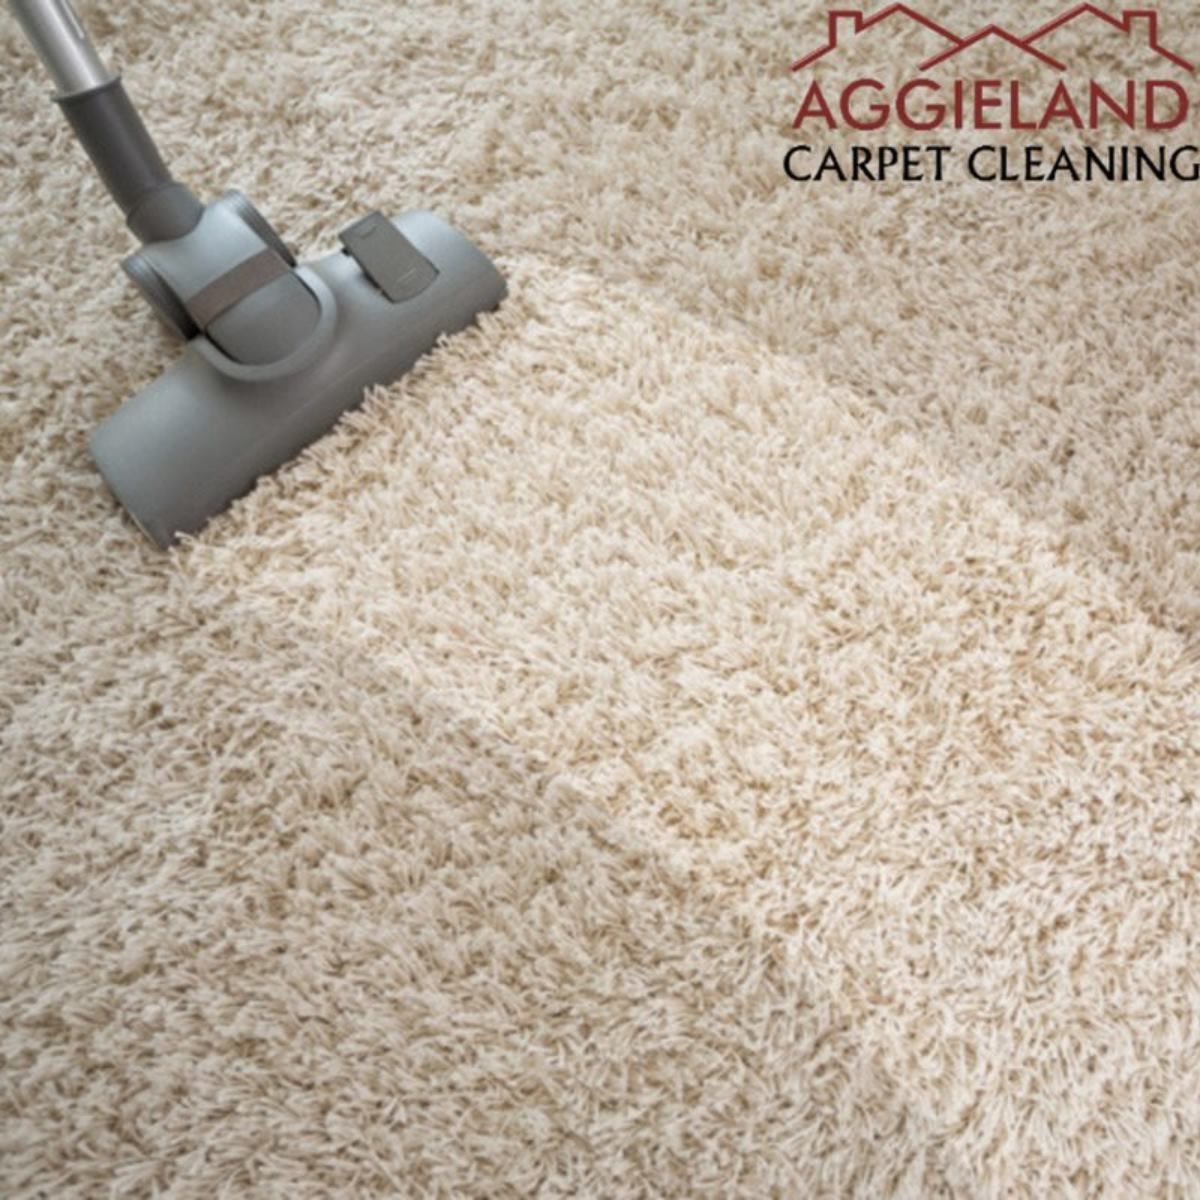 a vacuum cleaner on a carpet that says aggieland carpet cleaning